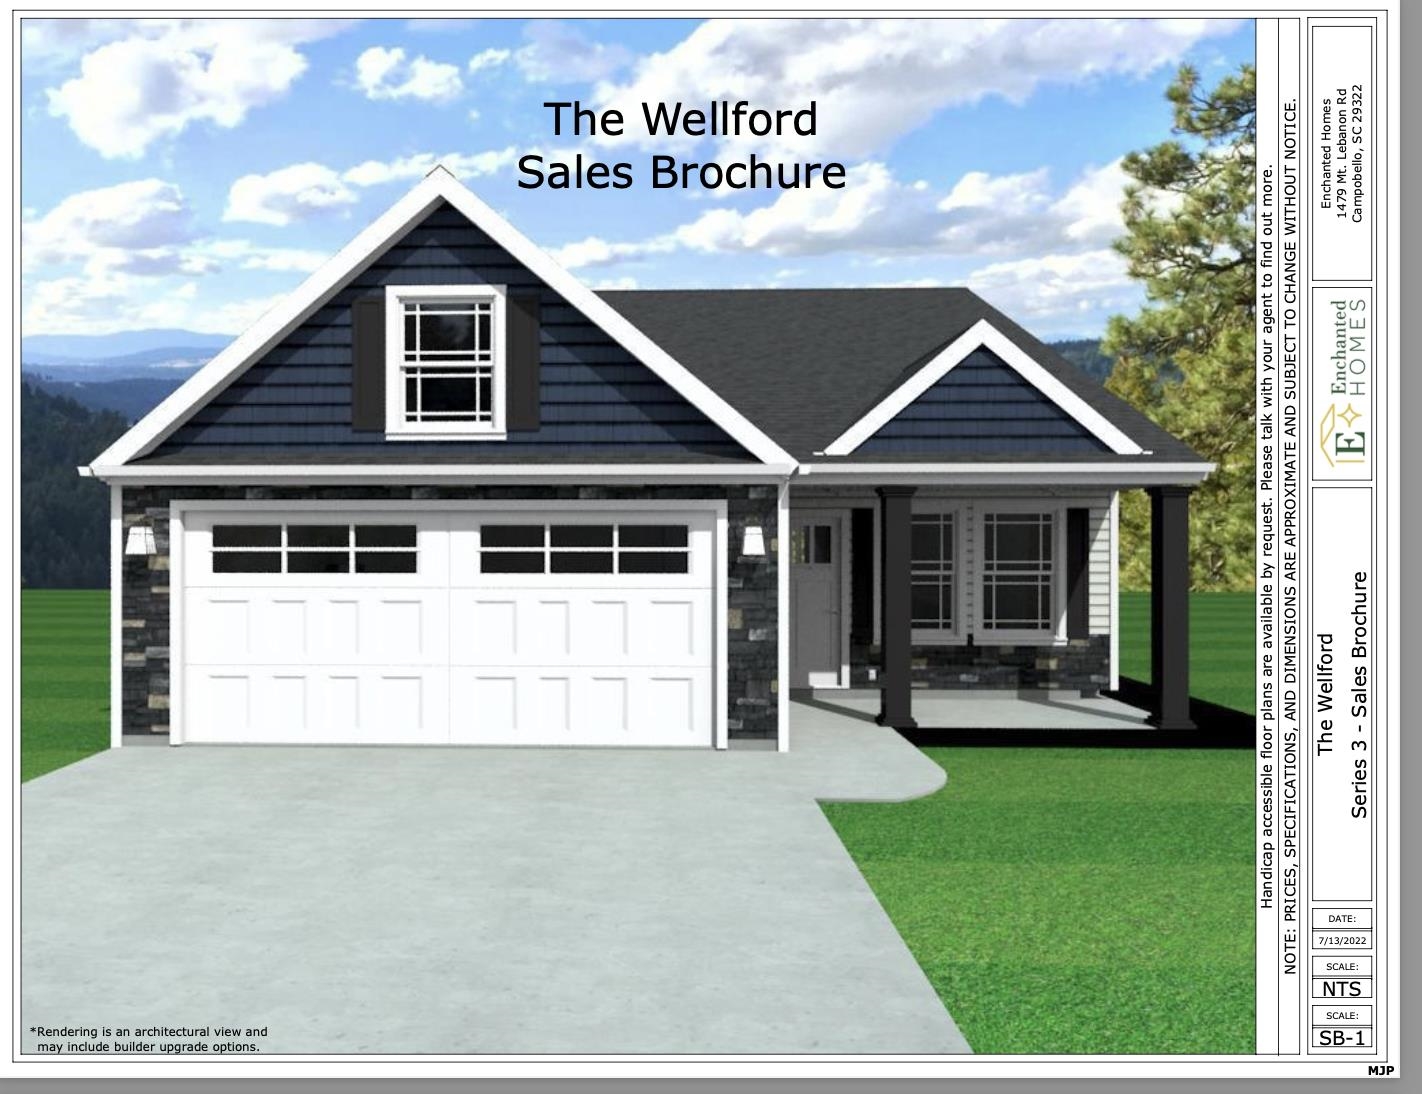 The WELLFORD (Lot 3) offers a modern, open concept living area perfect for entertaining.  3 bedroom, 2 bath. Complete with the trademark chair rail, crown molding, and rope lighting.  12' x 12' covered back patio and 10' x 12' uncovered concrete patio overlooking.  Upgraded Cabinets.  30-year architectural shingles, site-built construction, and a 10 year limited warranty are included to give you peace of mind. Closing cost or upgrades incentives available when working with a preferred lender and attorney!!